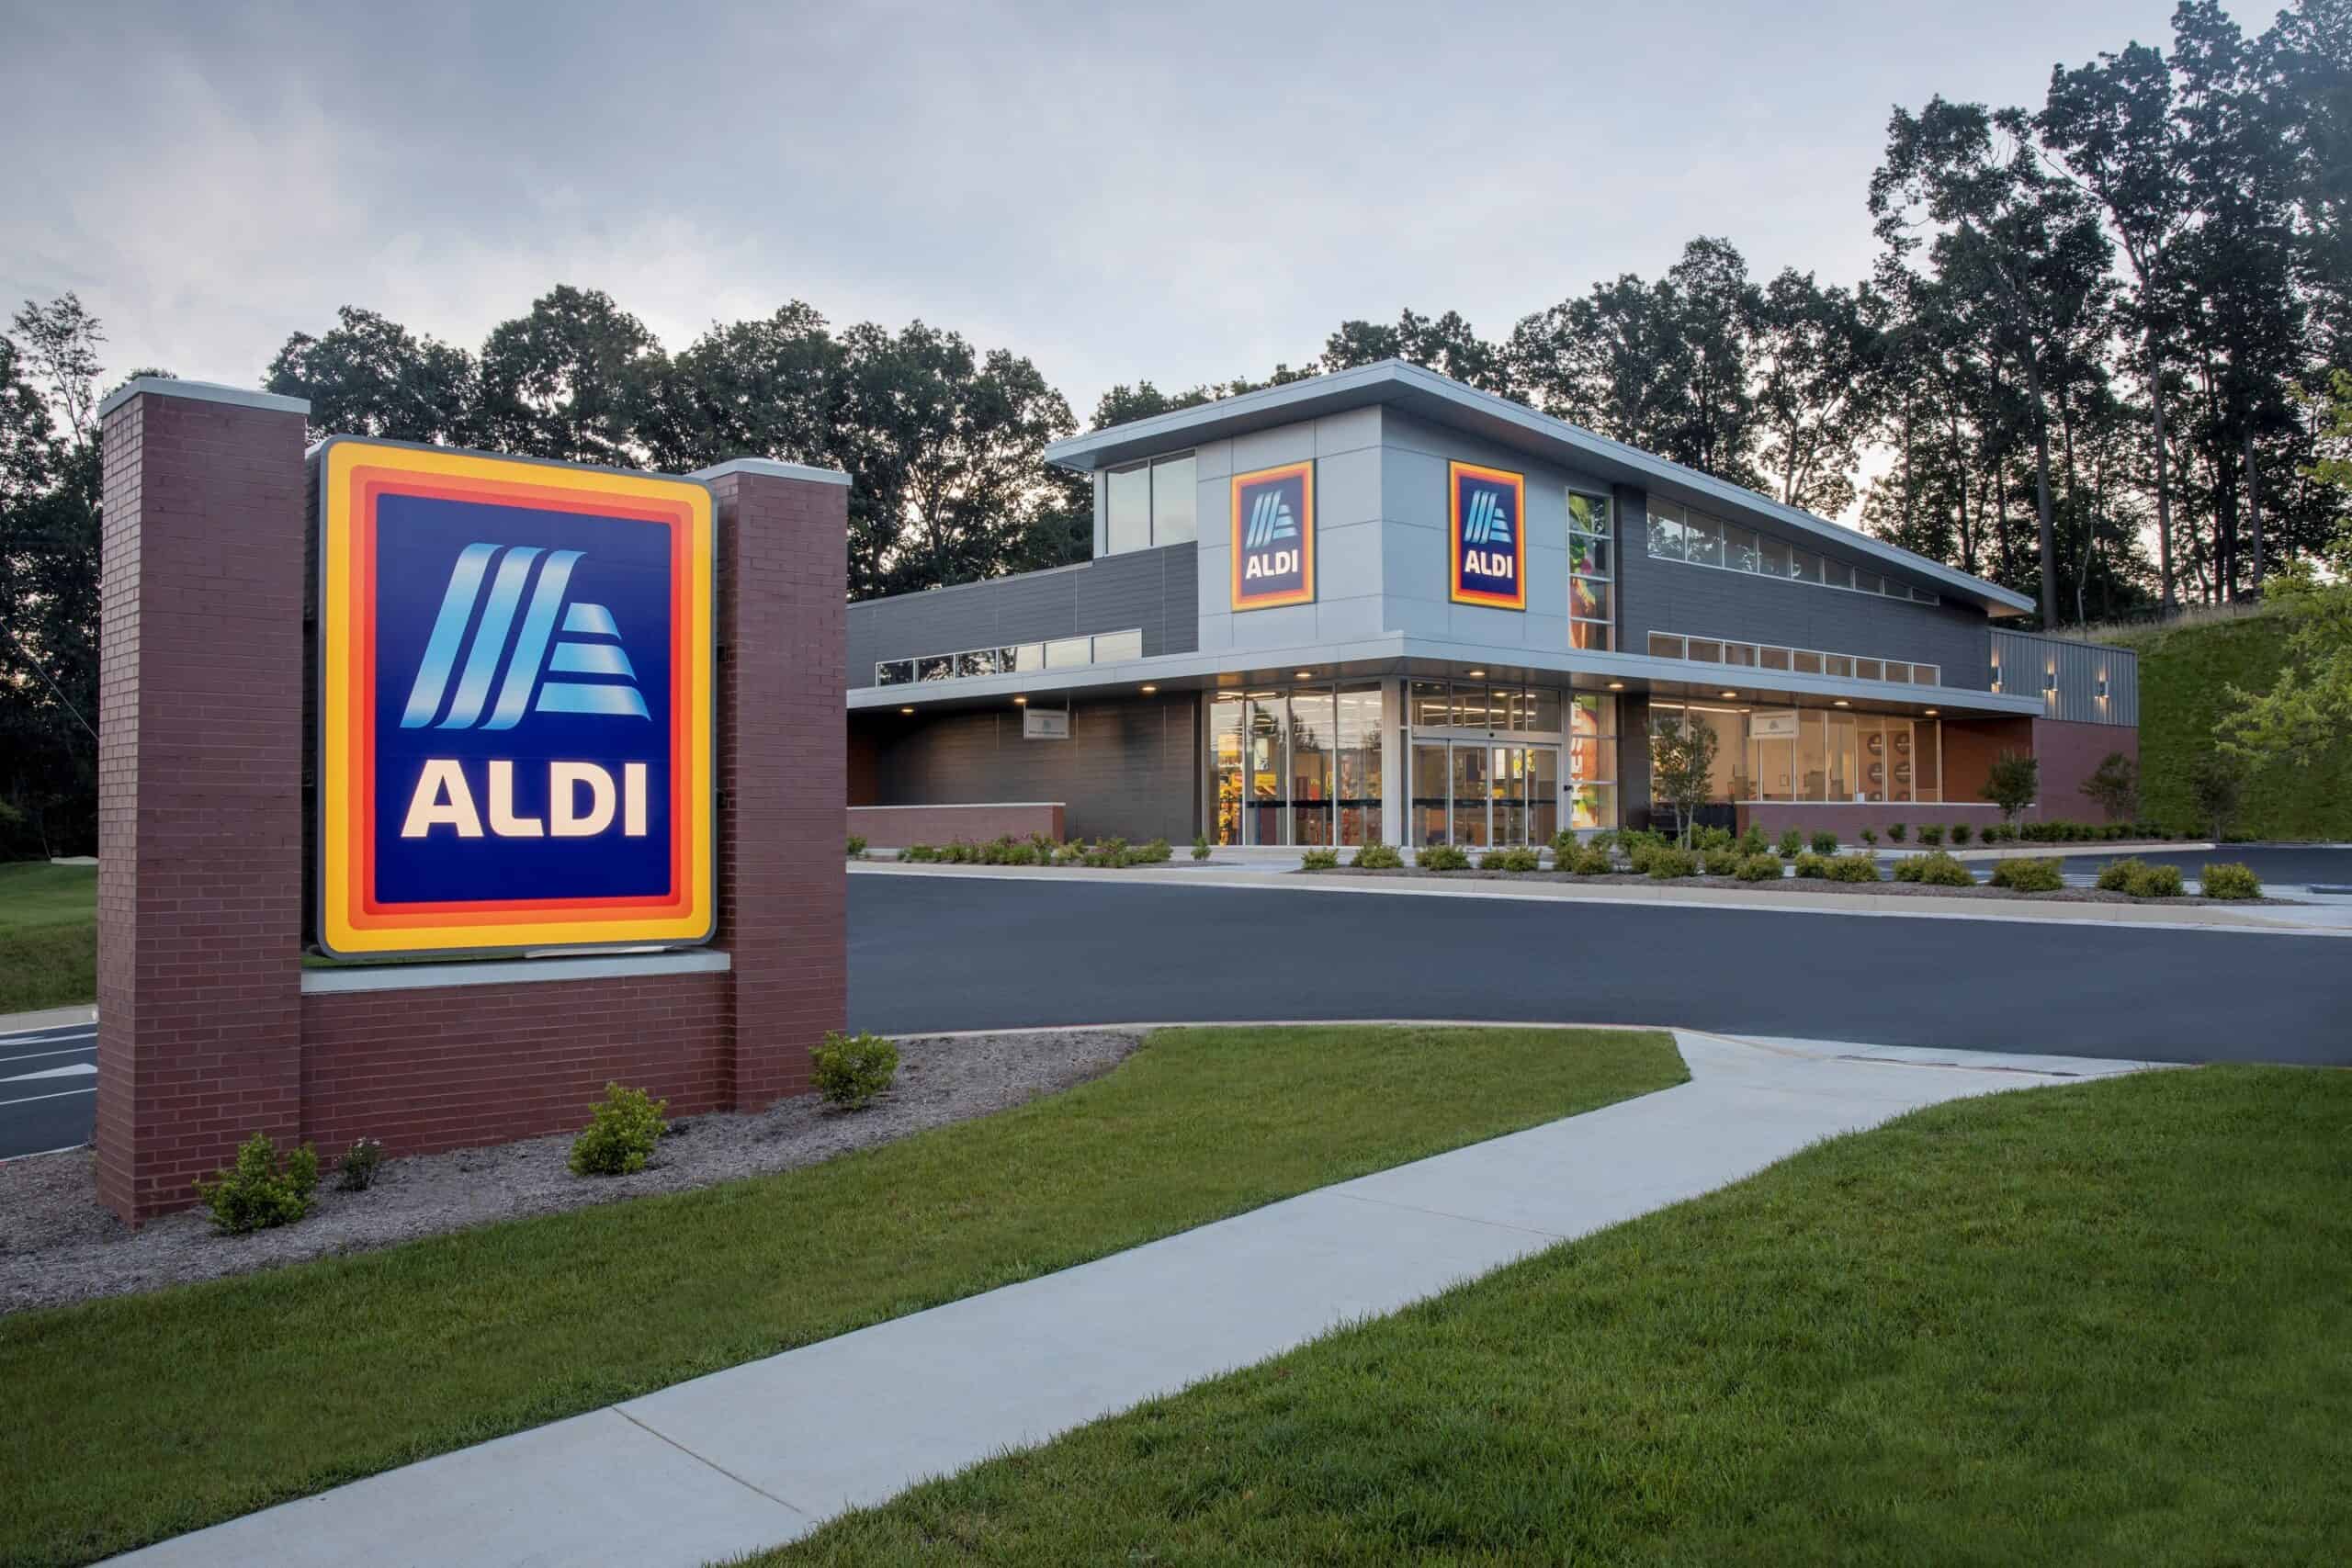 <p>A study by <a href="https://reviews.cheapism.com/cheapest-groceries-walmart-vs-kroger-vs-aldi/" rel="noopener">Cheapism</a> showed that Aldi could save you 42% off your groceries bill as it is the cheapest place to buy groceries in America. If you’re already purchasing the generic brand at your current grocery store, you can still save 20% of your grocery bill by switching to Aldi.</p> <p>Yes, there are claims out there that by doing nothing but changing your grocery store, you can save $2,548 to $5,352 a year by shopping at Aldi (the equivalent of 20% and 42%, respectively)</p>